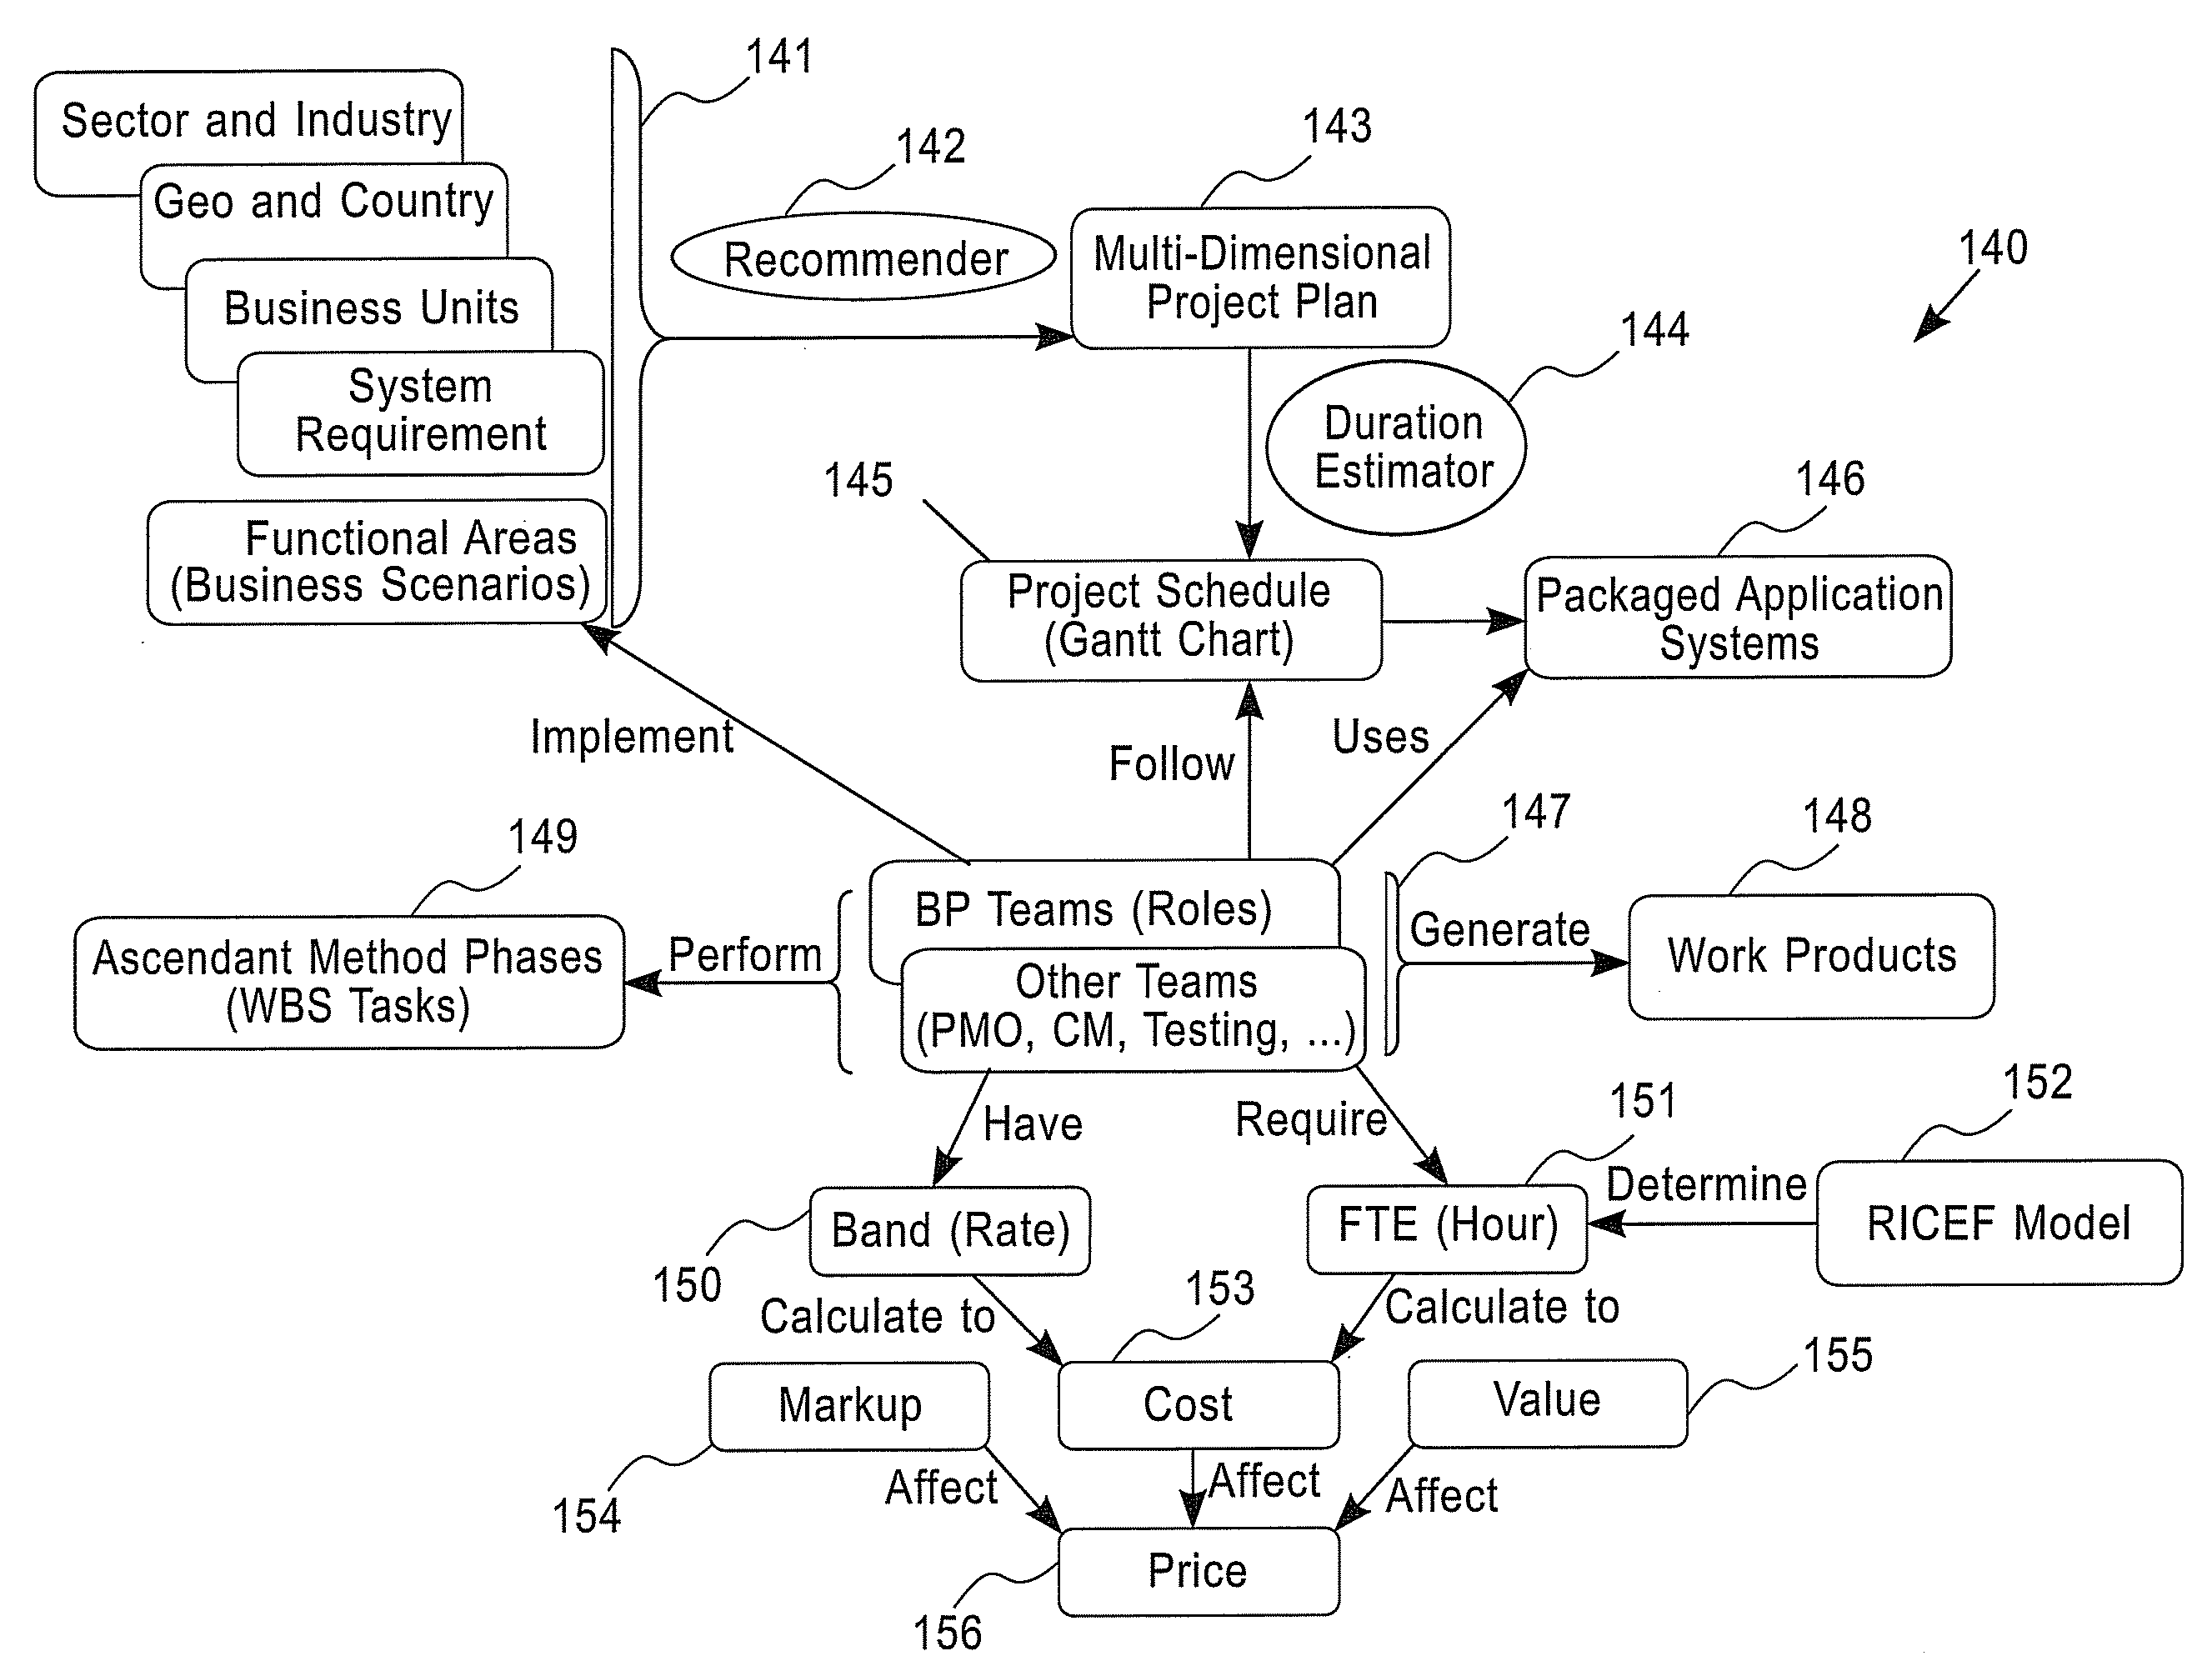 Method and system for staffing and cost estimation models aligned with multi-dimensional project plans for packaged software applications